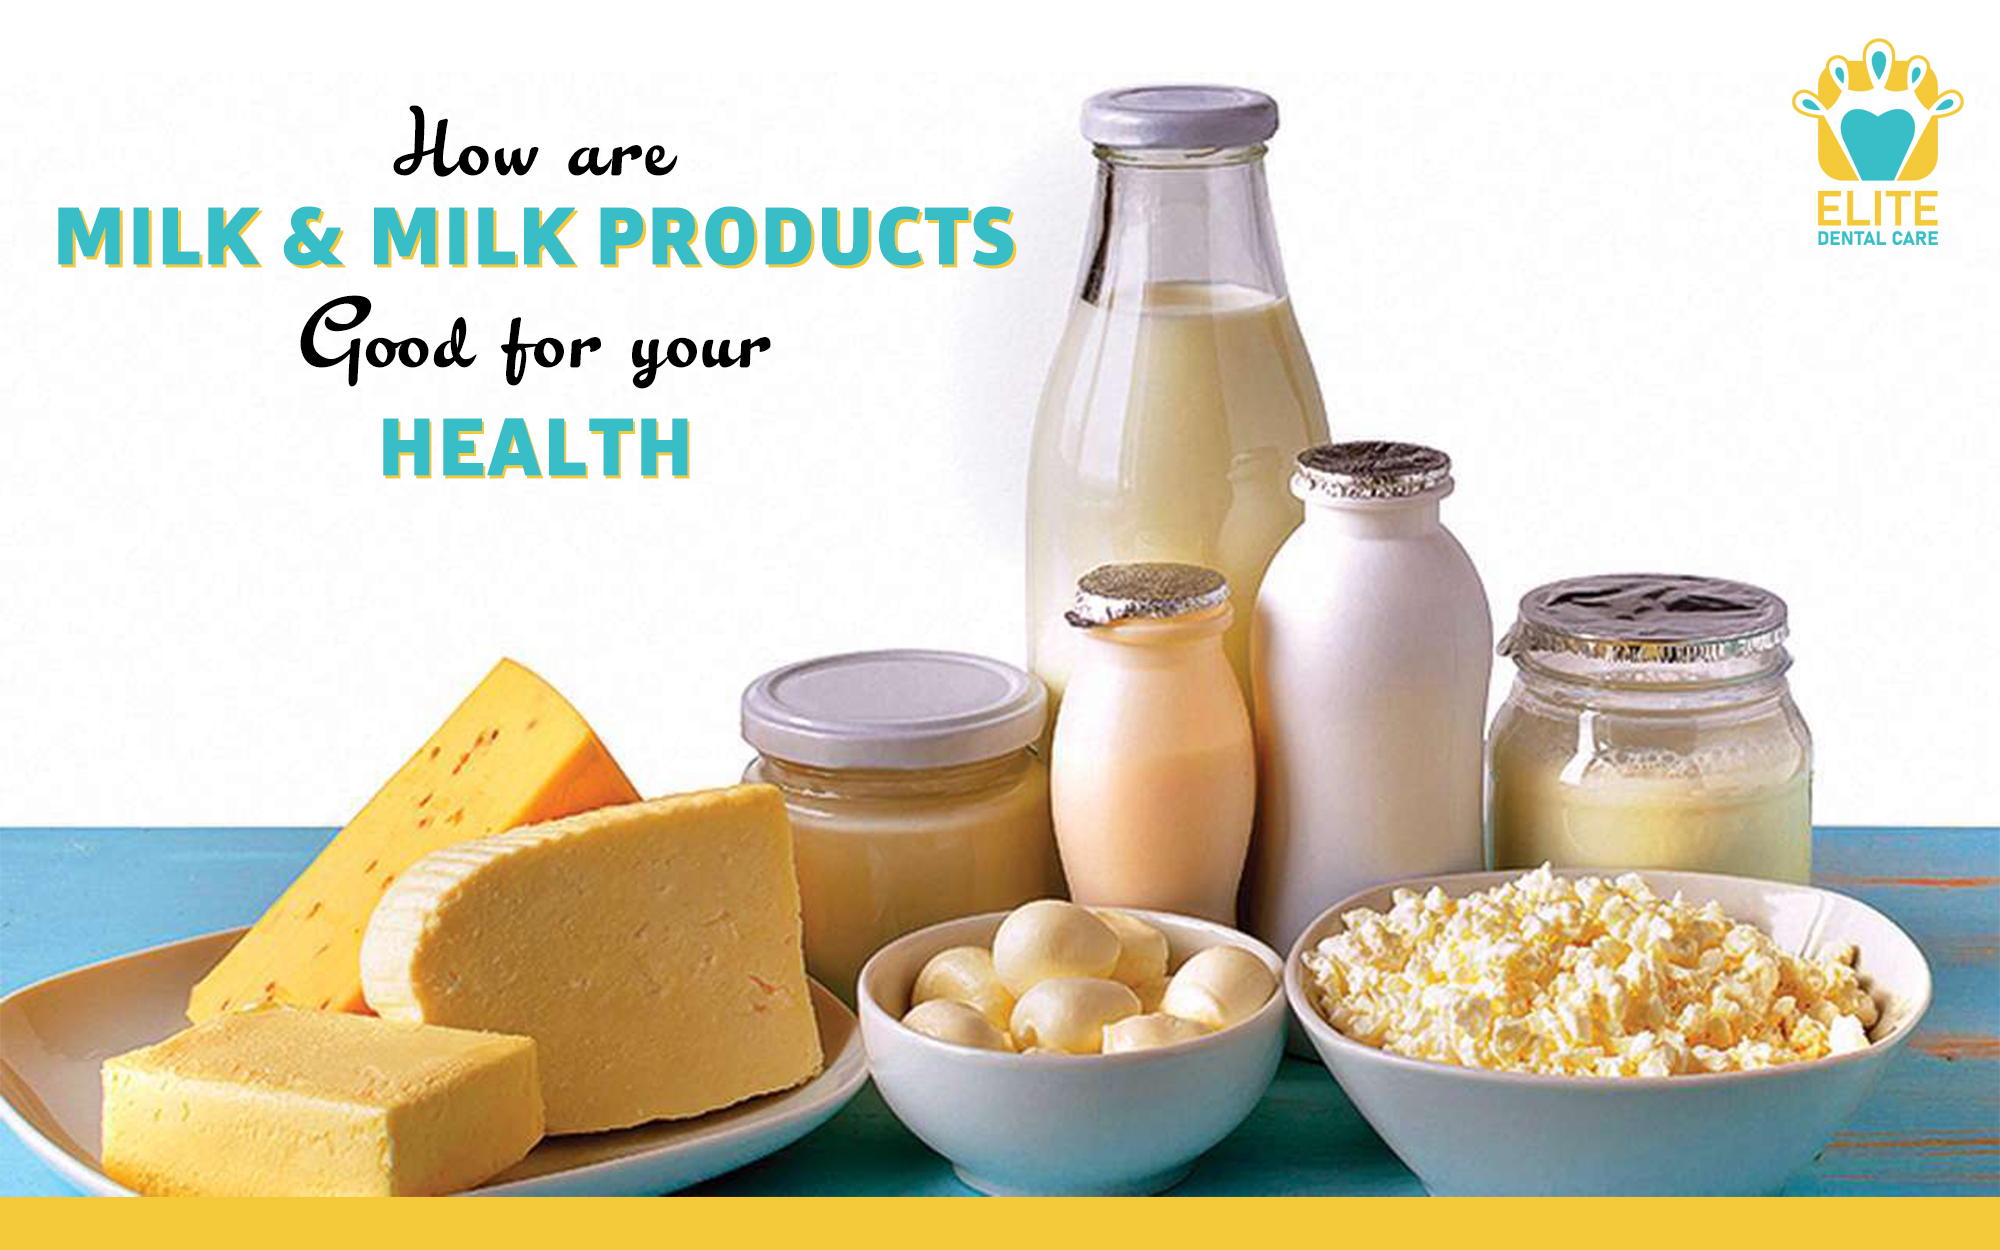 HOW ARE MILK AND MILK PRODUCTS GOOD FOR YOUR DENTAL HEALTH